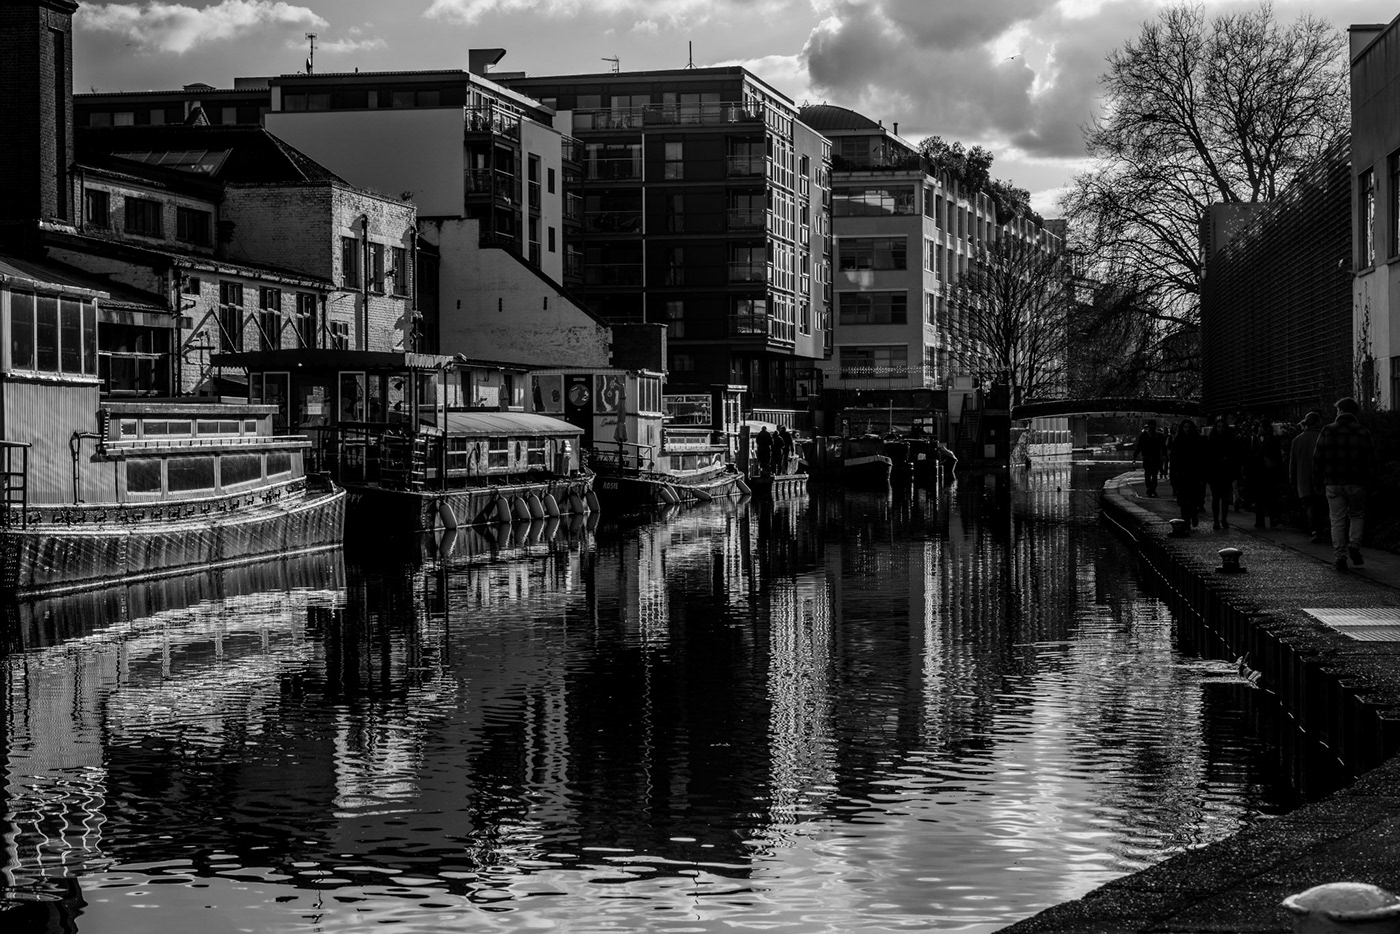 London regent's canal Photography  photographer Shane Aurousseau Waterways & Canals travel photography narrowboat canal canoes